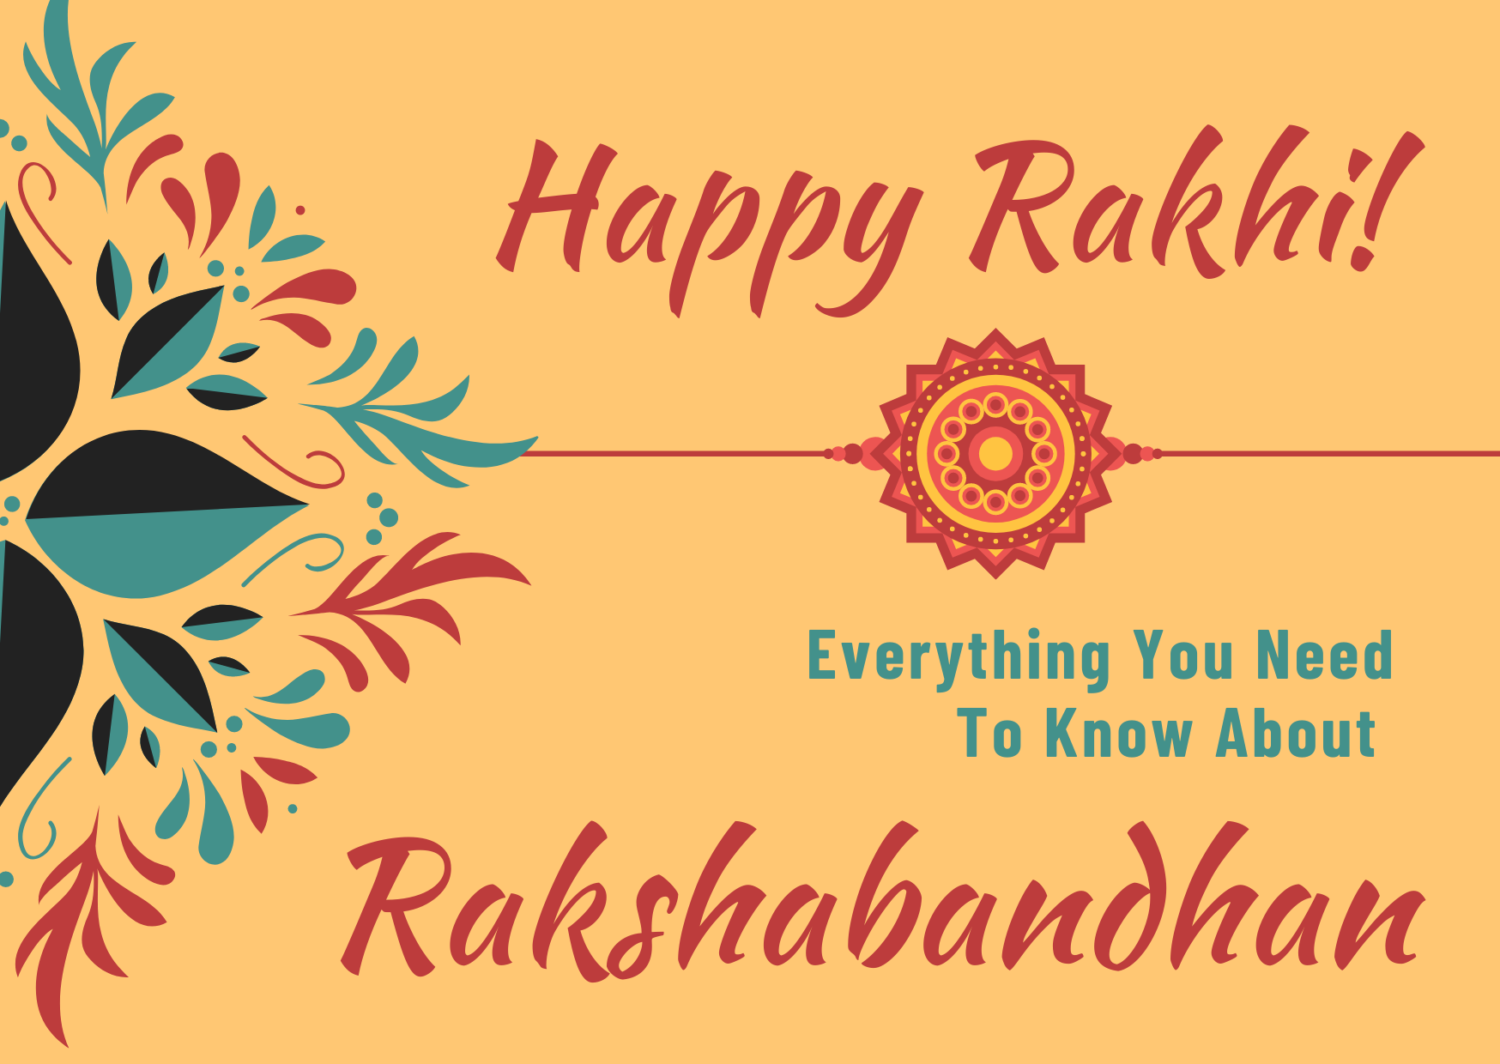 Top Searched Questions On Raksha Bandhan Answered